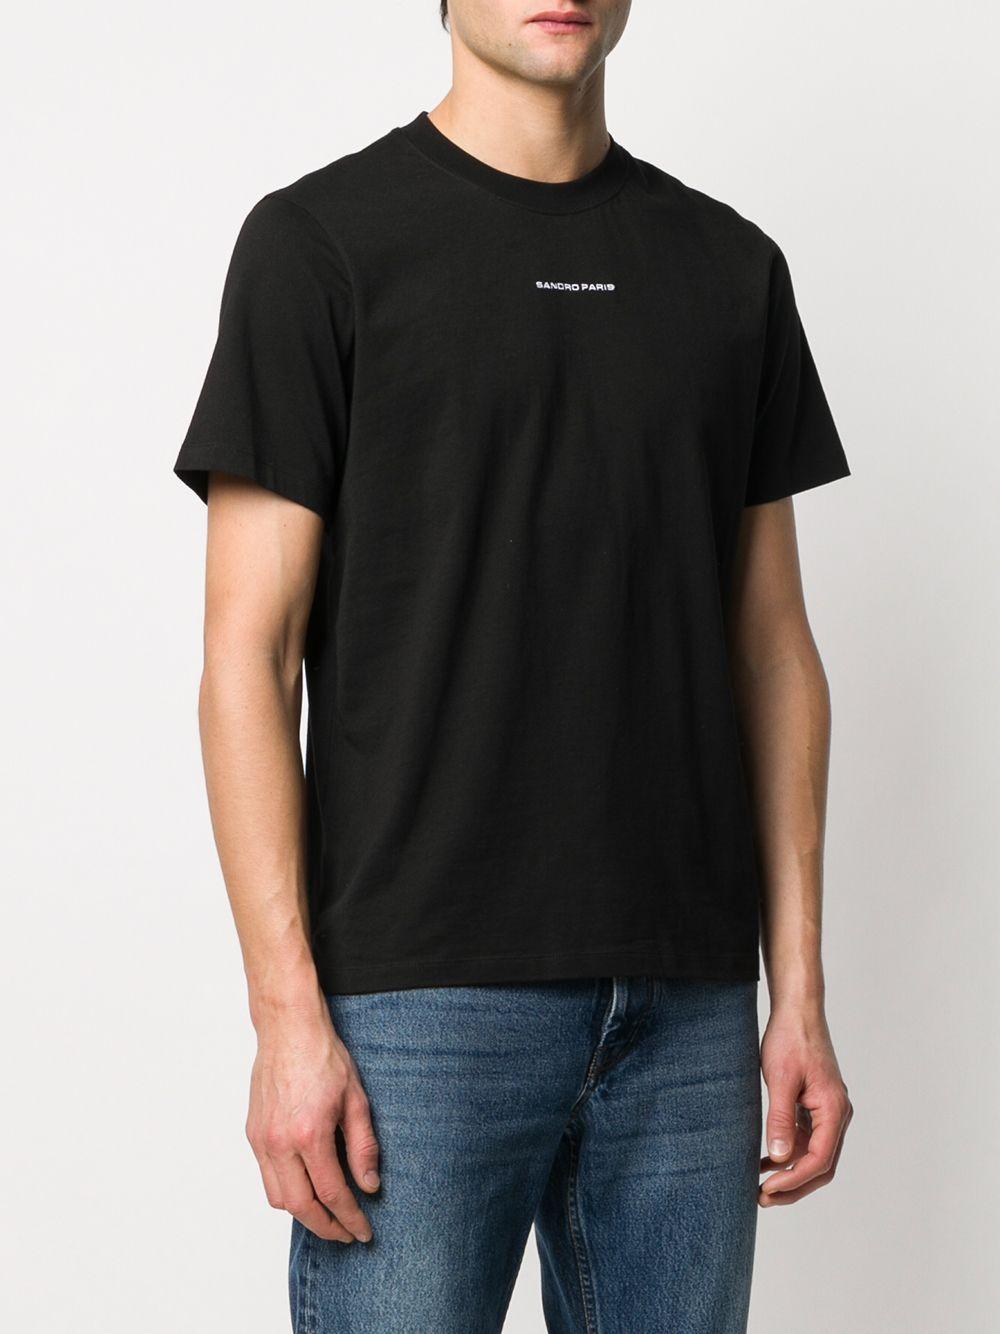 Sandro Cotton Embroidered Logo T-shirt in Black for Men - Save 23% - Lyst